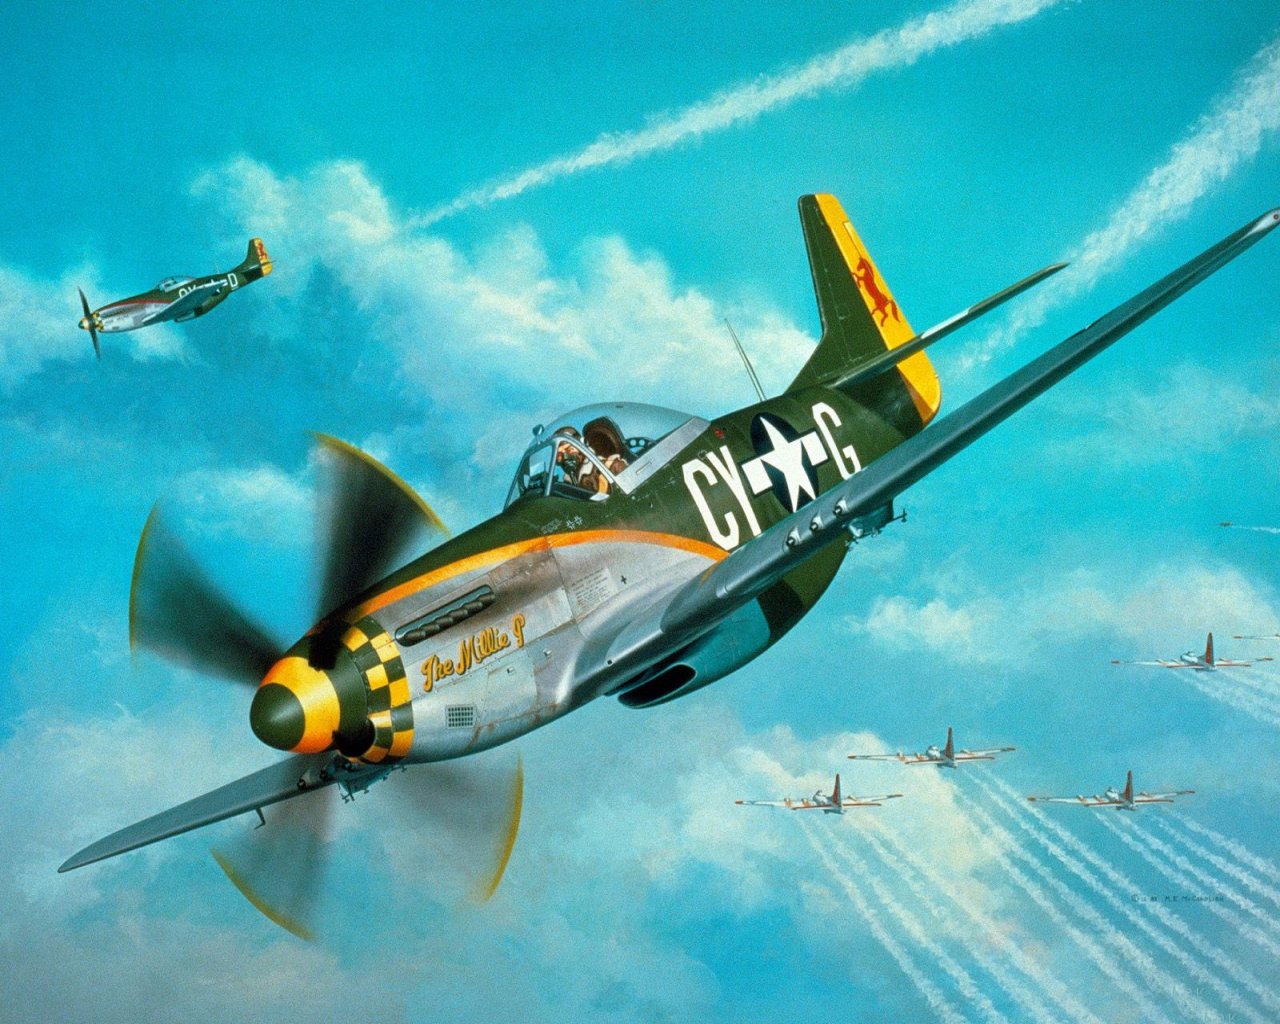 Wallpapers Airplane Painting Art P-51 Mustang Aviation Image ...